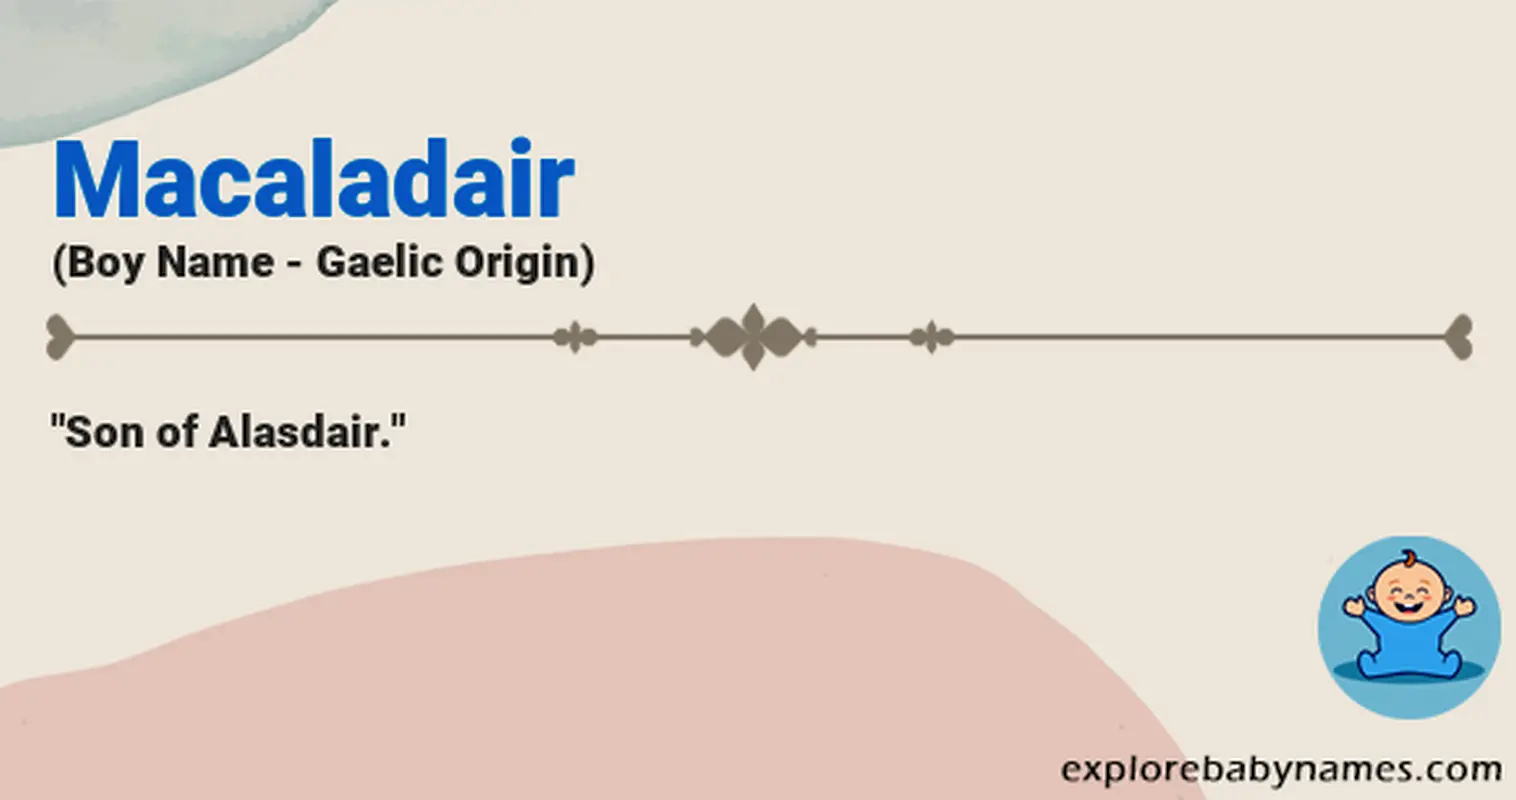 Meaning of Macaladair